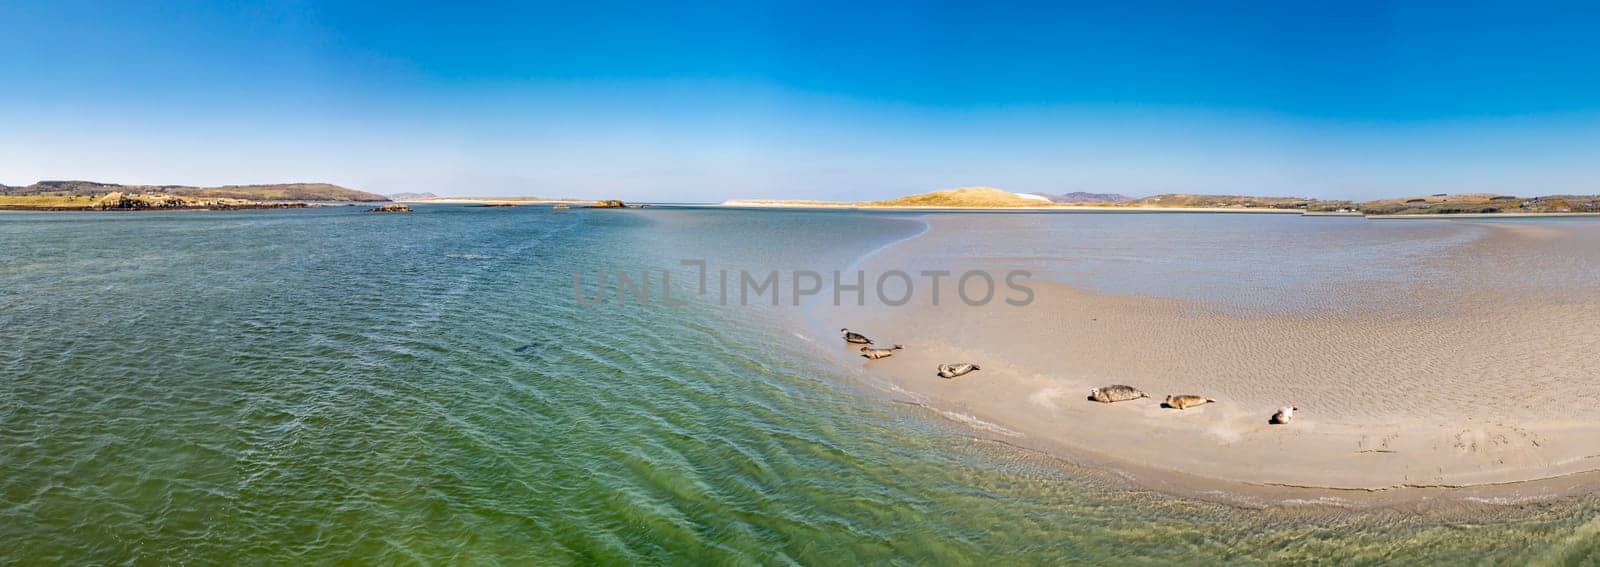 Seals swimming and and resting at Gweebarra bay - County Donegal, Ireland by TLC_Automation